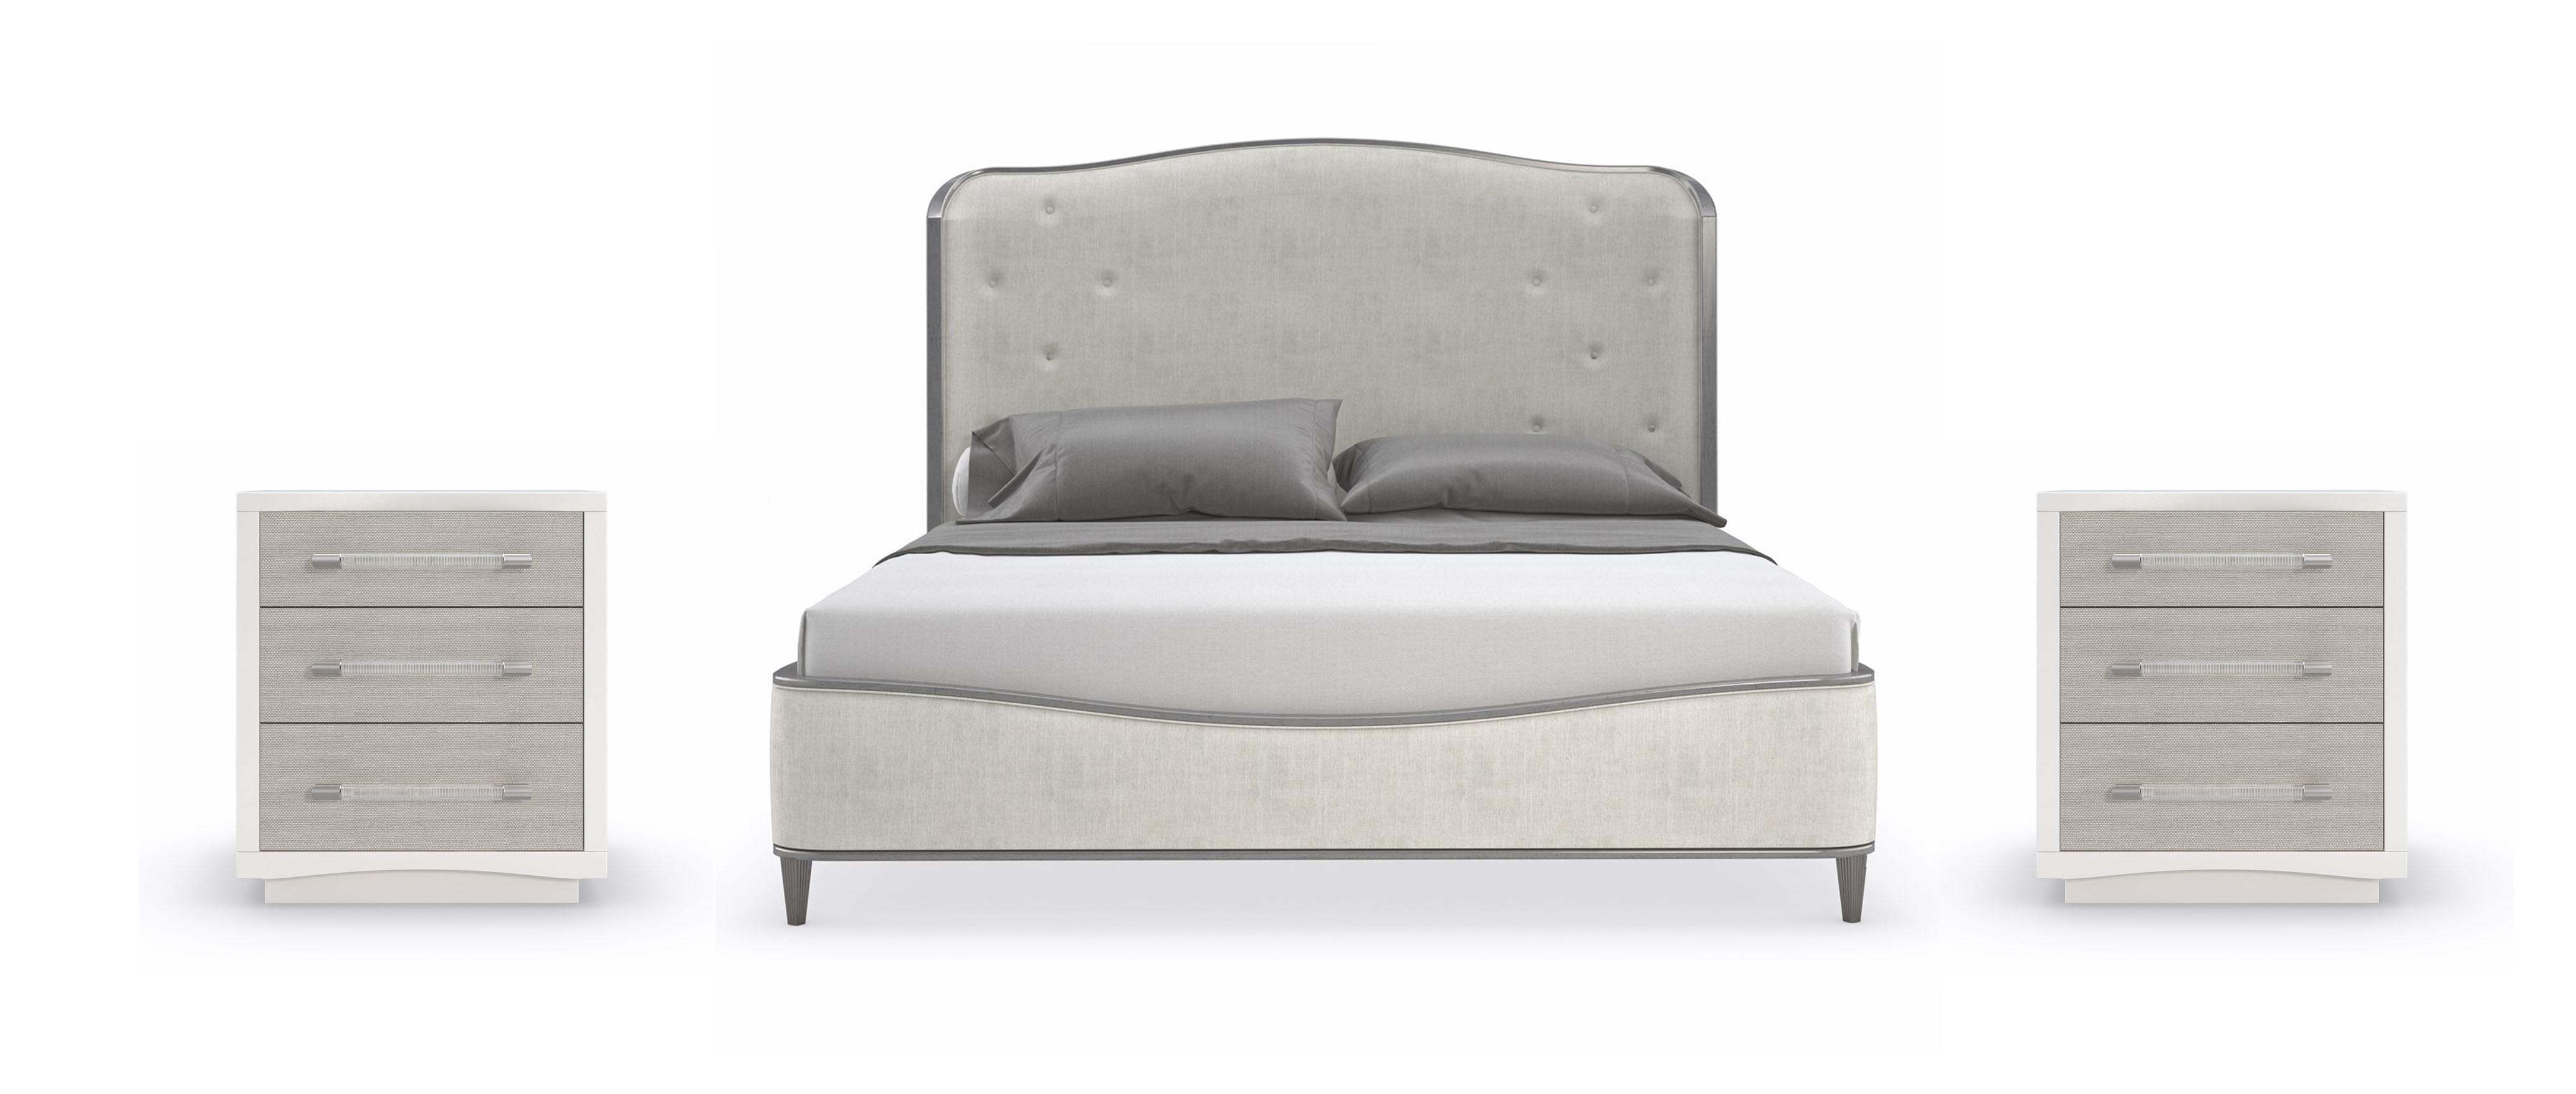 Contemporary Panel Bedroom Set CLEAR THE AIR / CLARITY CLA-421-123-Set-3 in Light Gray Fabric